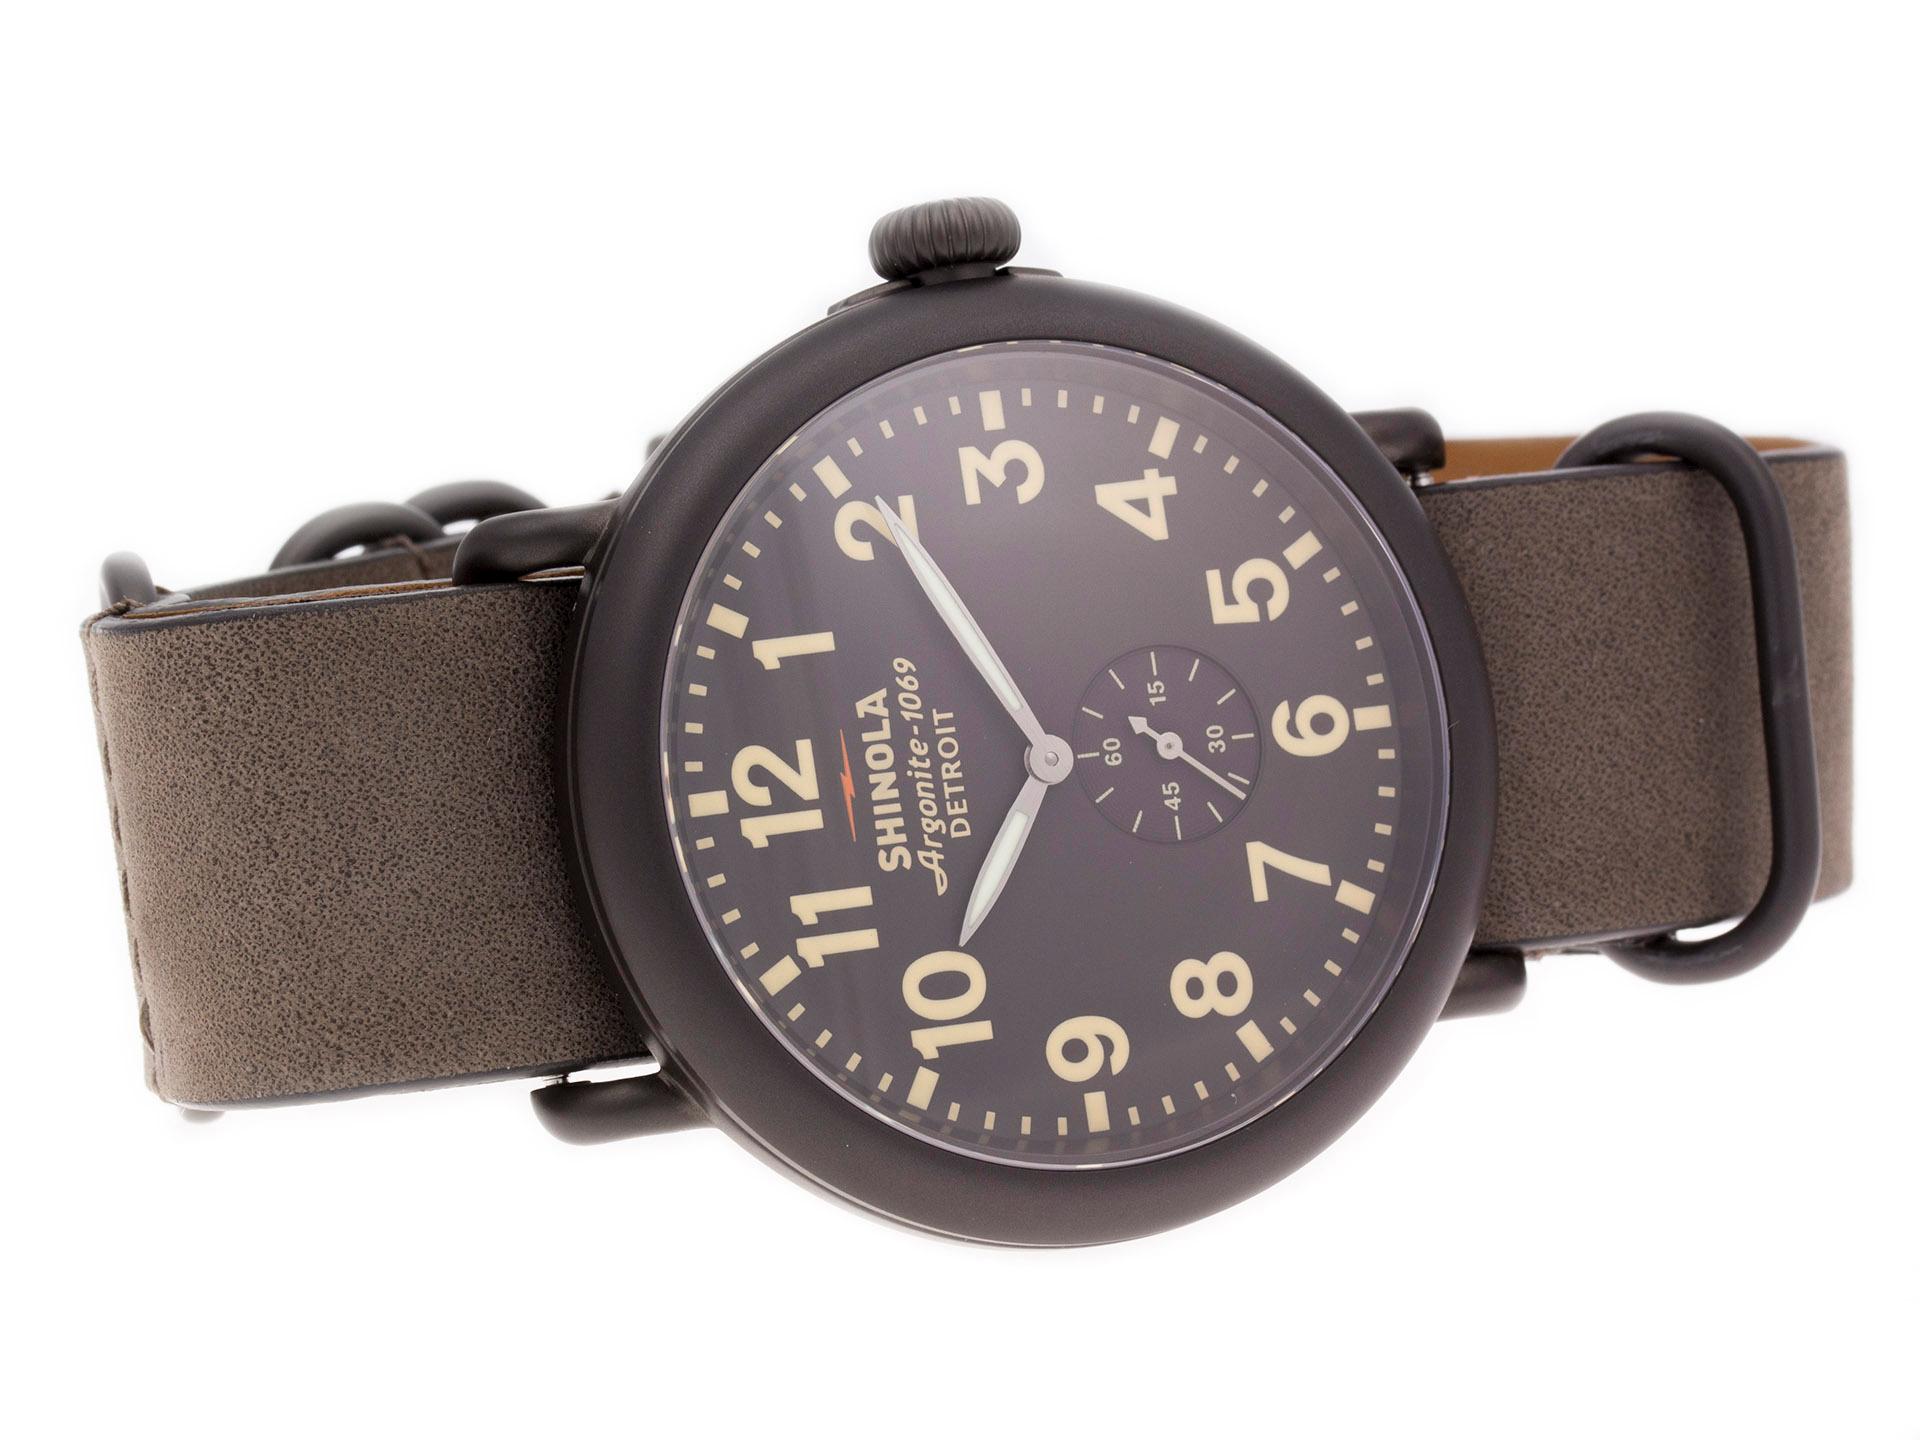 Gunmetal PVD Steel Shinola The Runwell Quartz Watch with a 47mm Case, Brown/Gray Dial, and Leather Strap with Tang Buckle. Features include Hours, Minutes, and Seconds. Comes with a Deluxe Gift Box and 2 Year Store